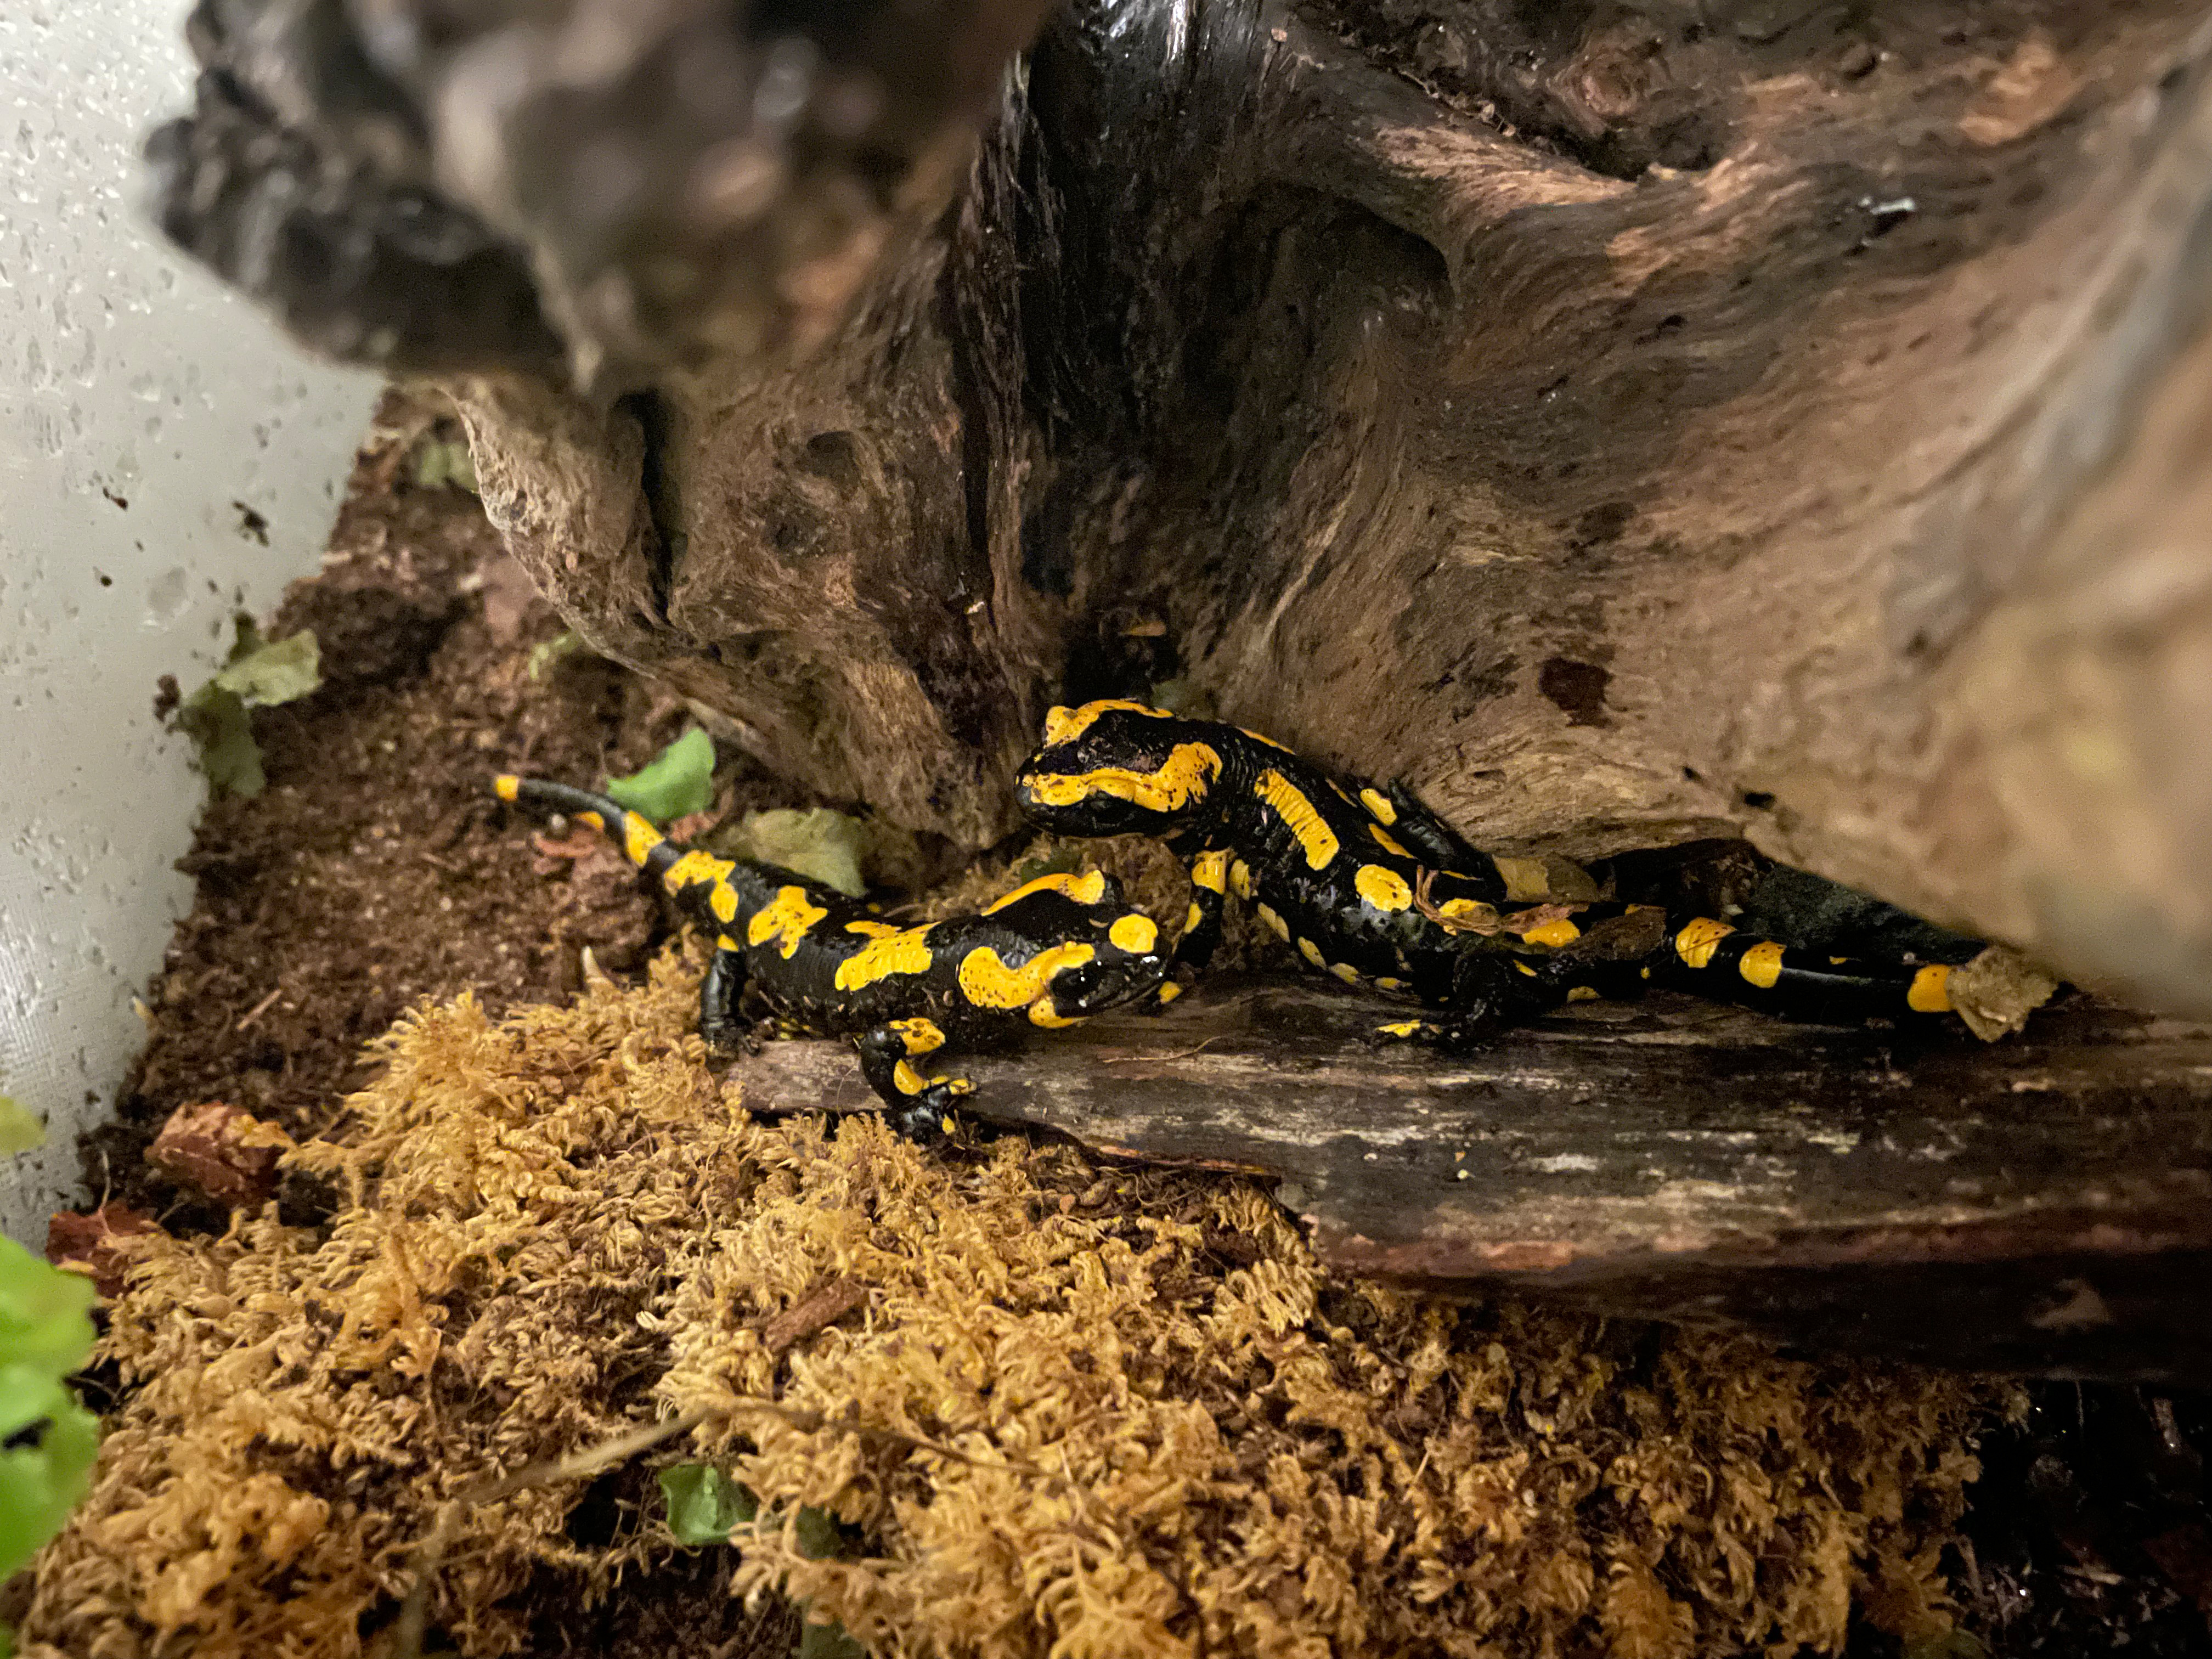 It is still too early to make any statements for the Central European Fire Salamanders, but we have been able to increase the number of individuals and keepers in the last six months. | Isabel Seyrling